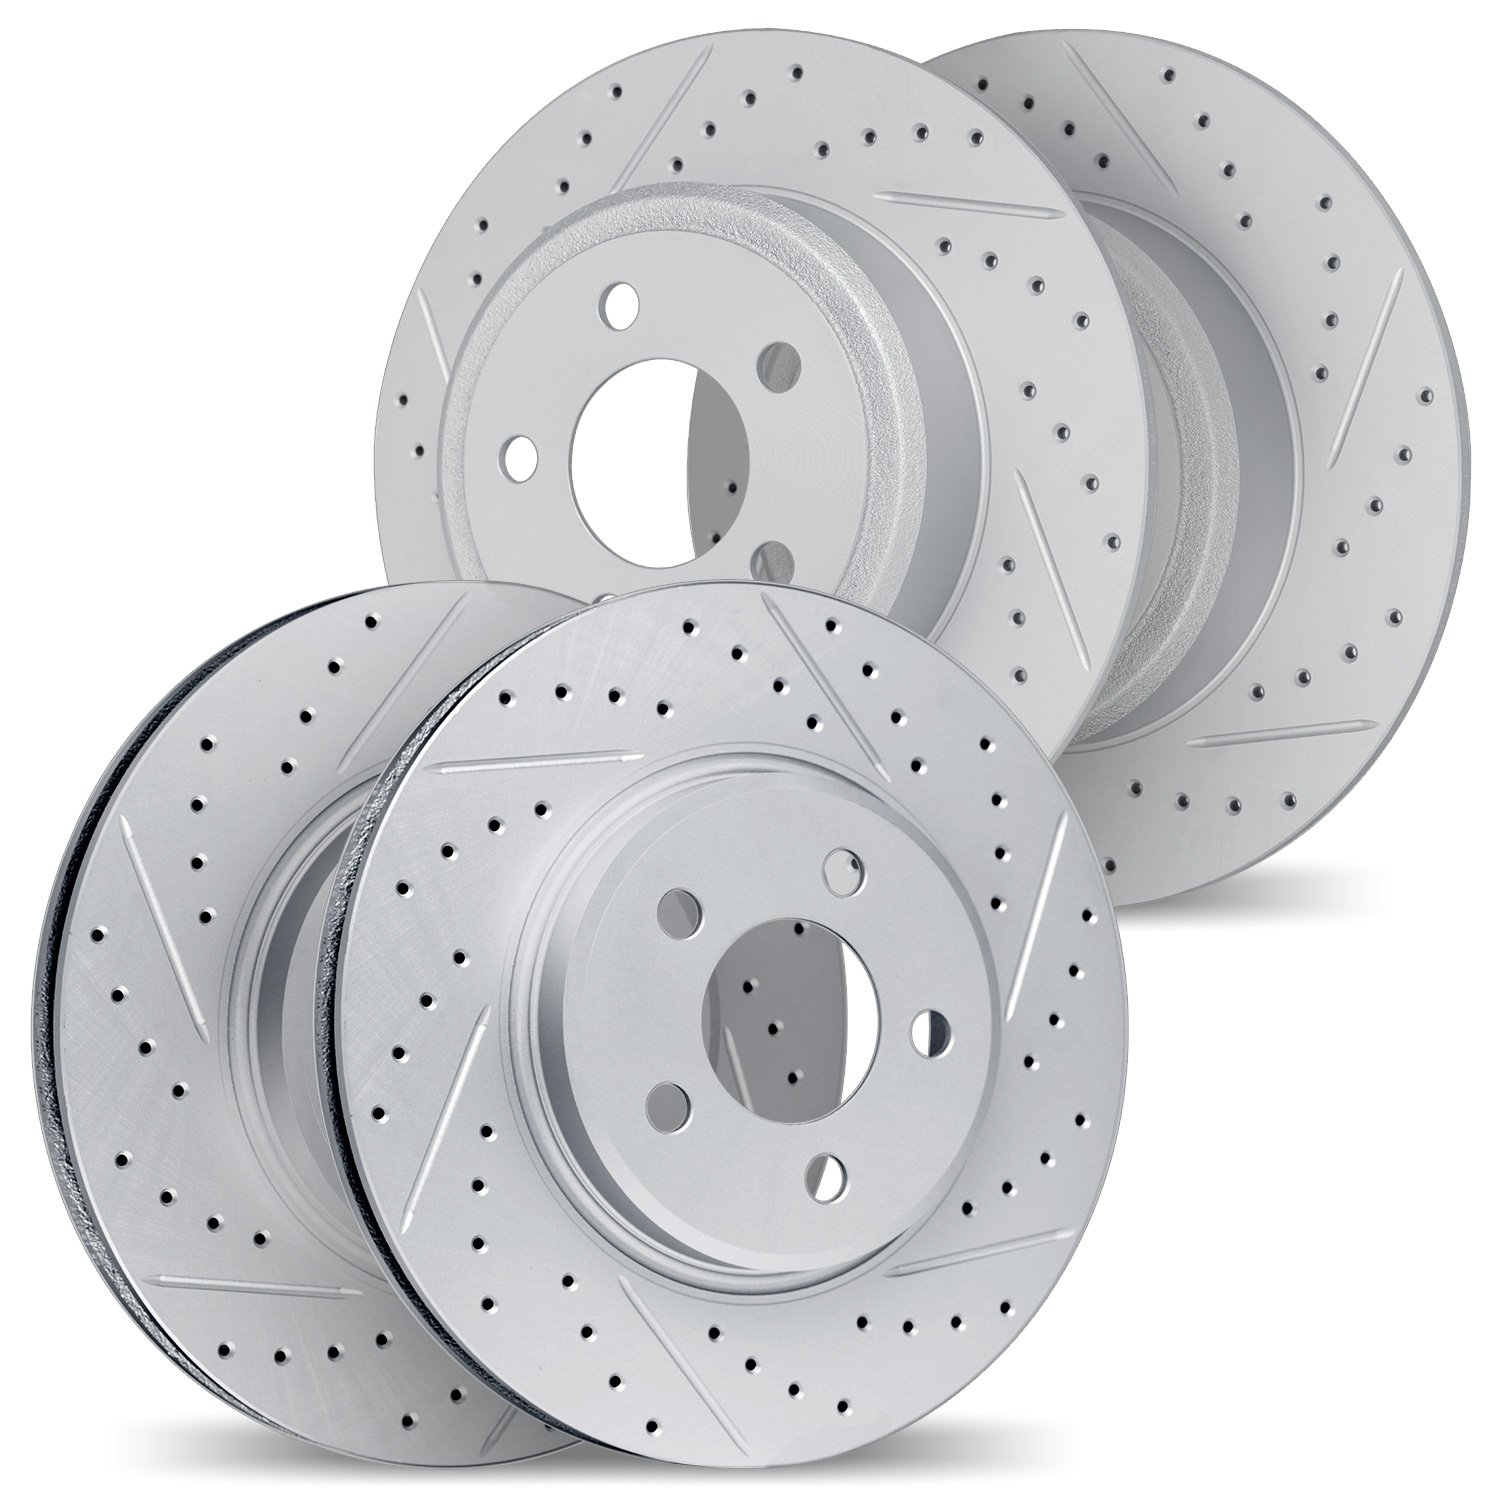 2004-47051 Geoperformance Drilled/Slotted Brake Rotors, 2004-2008 GM, Position: Front and Rear